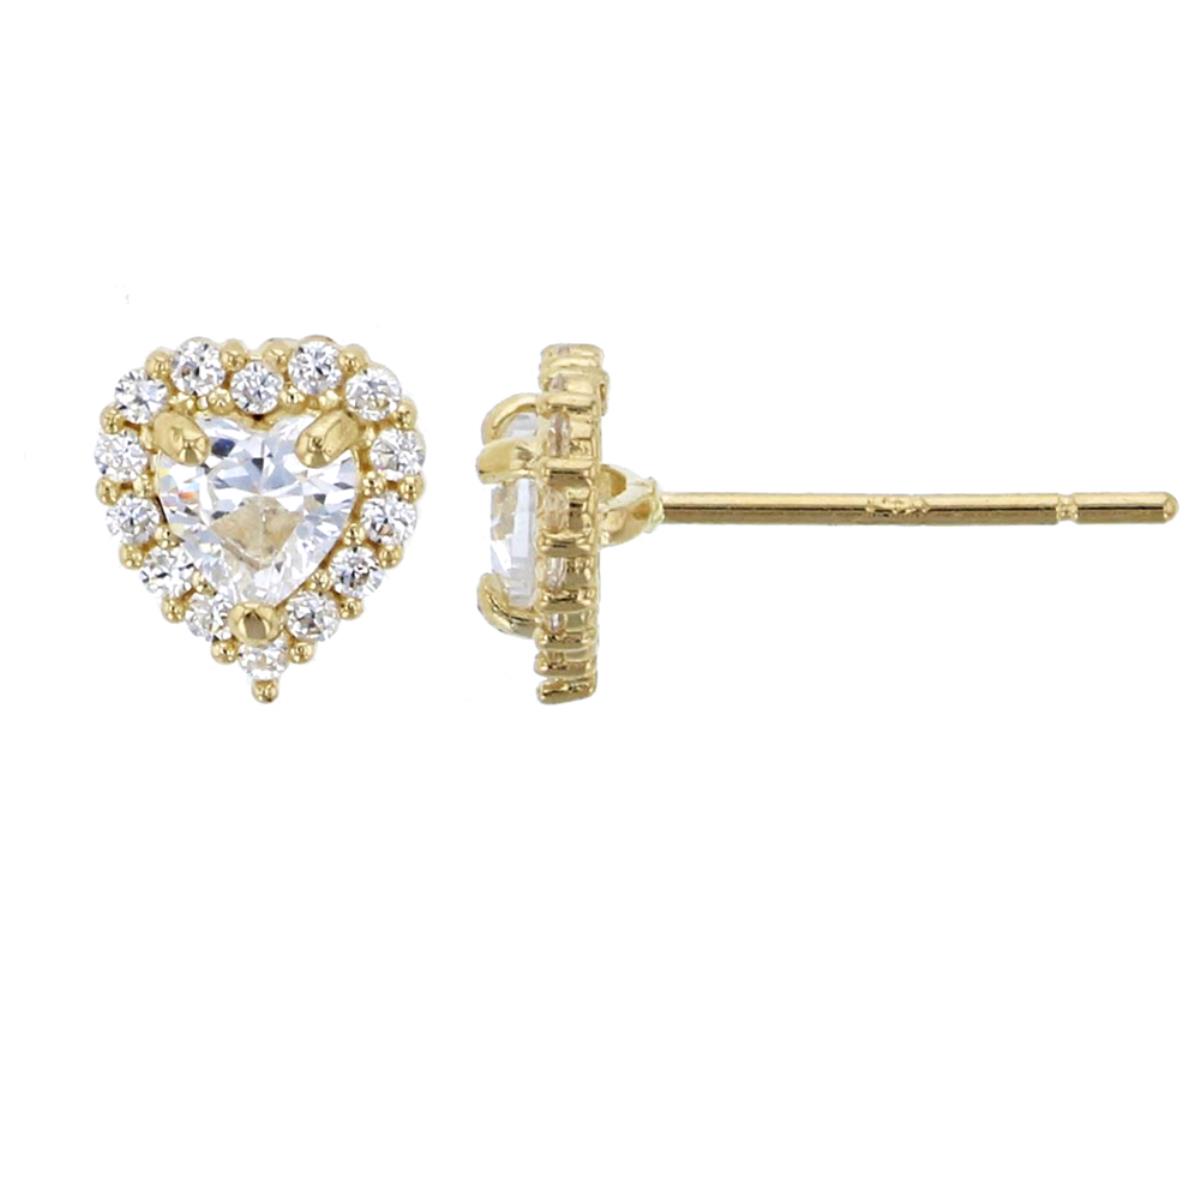 14K Yellow Gold Micropave 3.5mm Heart Cut Halo Stud Earring